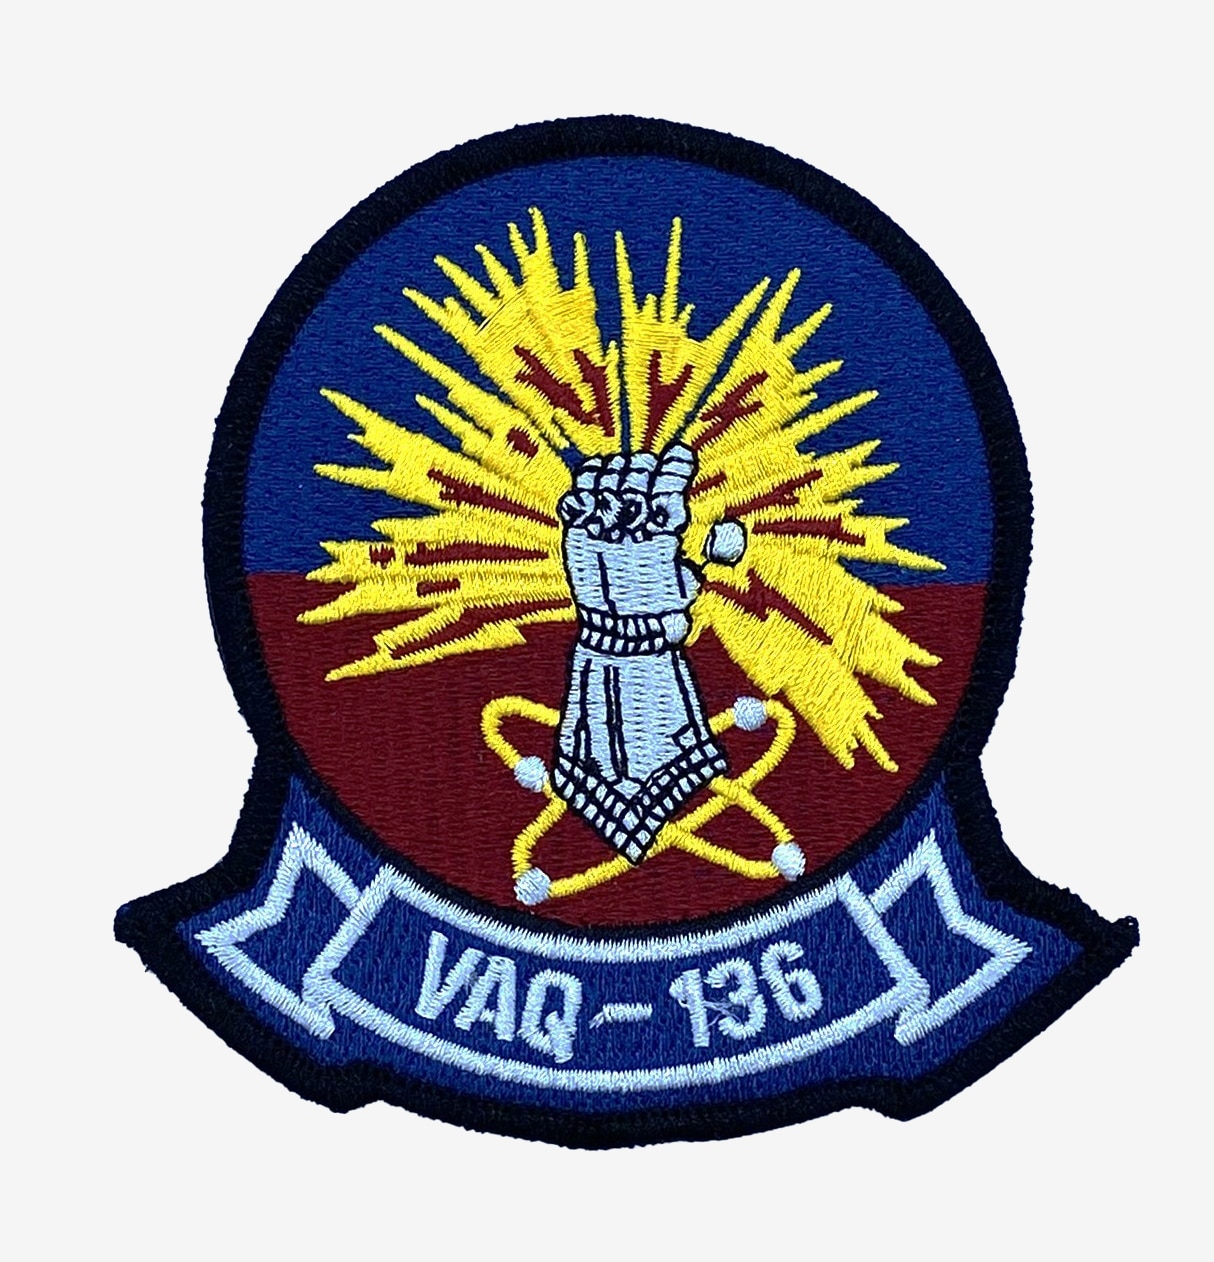 VAQ-136 Gauntlets Squadron Patch –With Hook and Loop, 4"